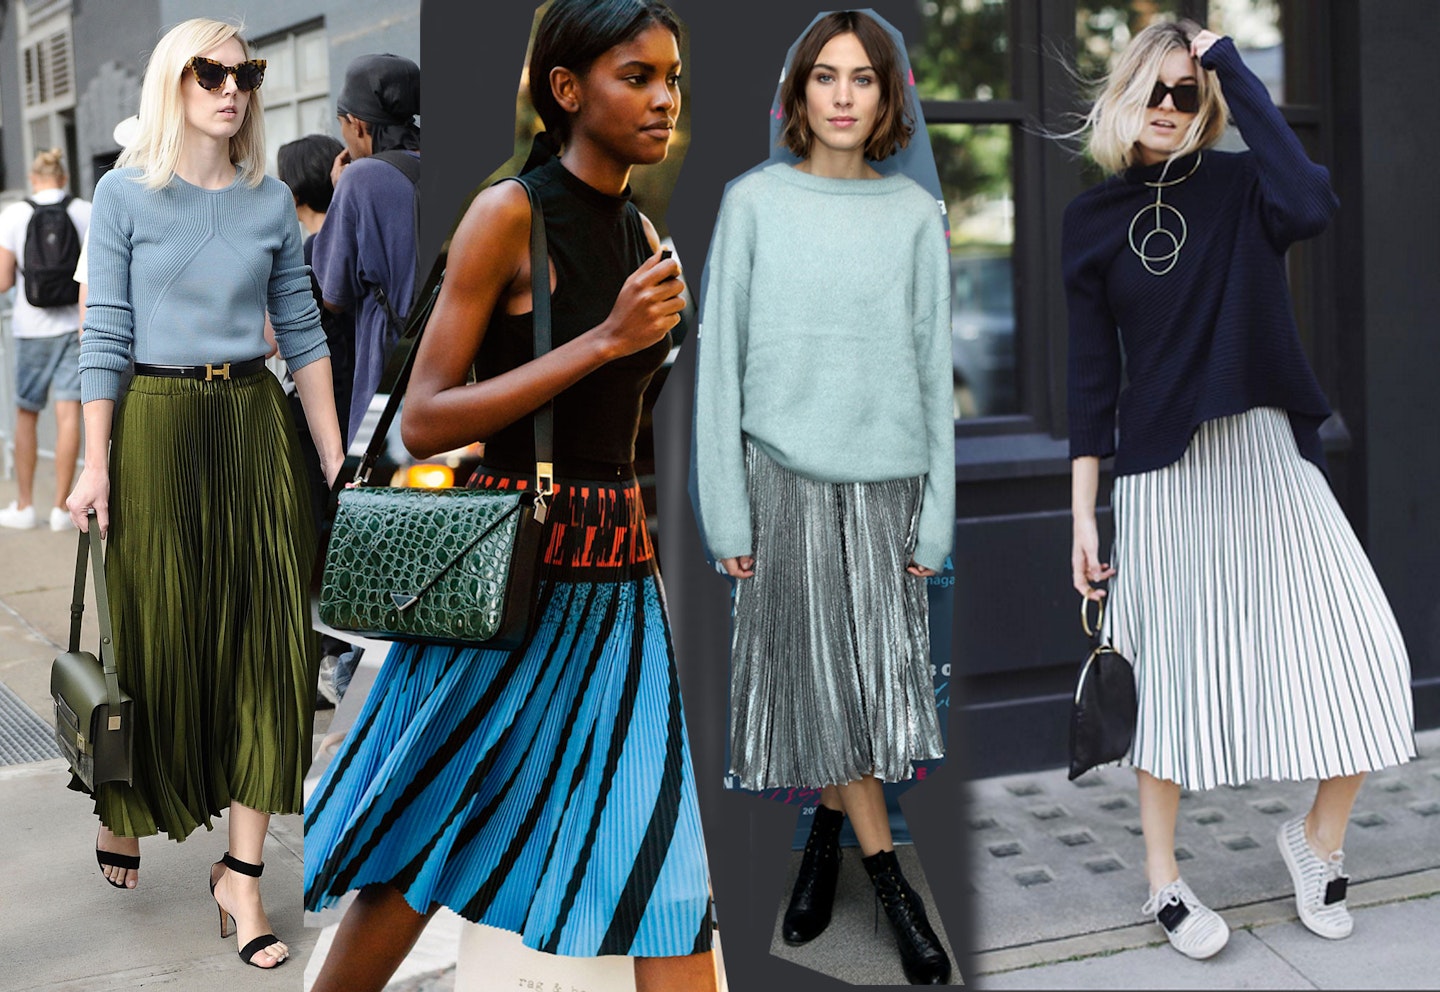 Pleated skirts [Getty and Instagram]